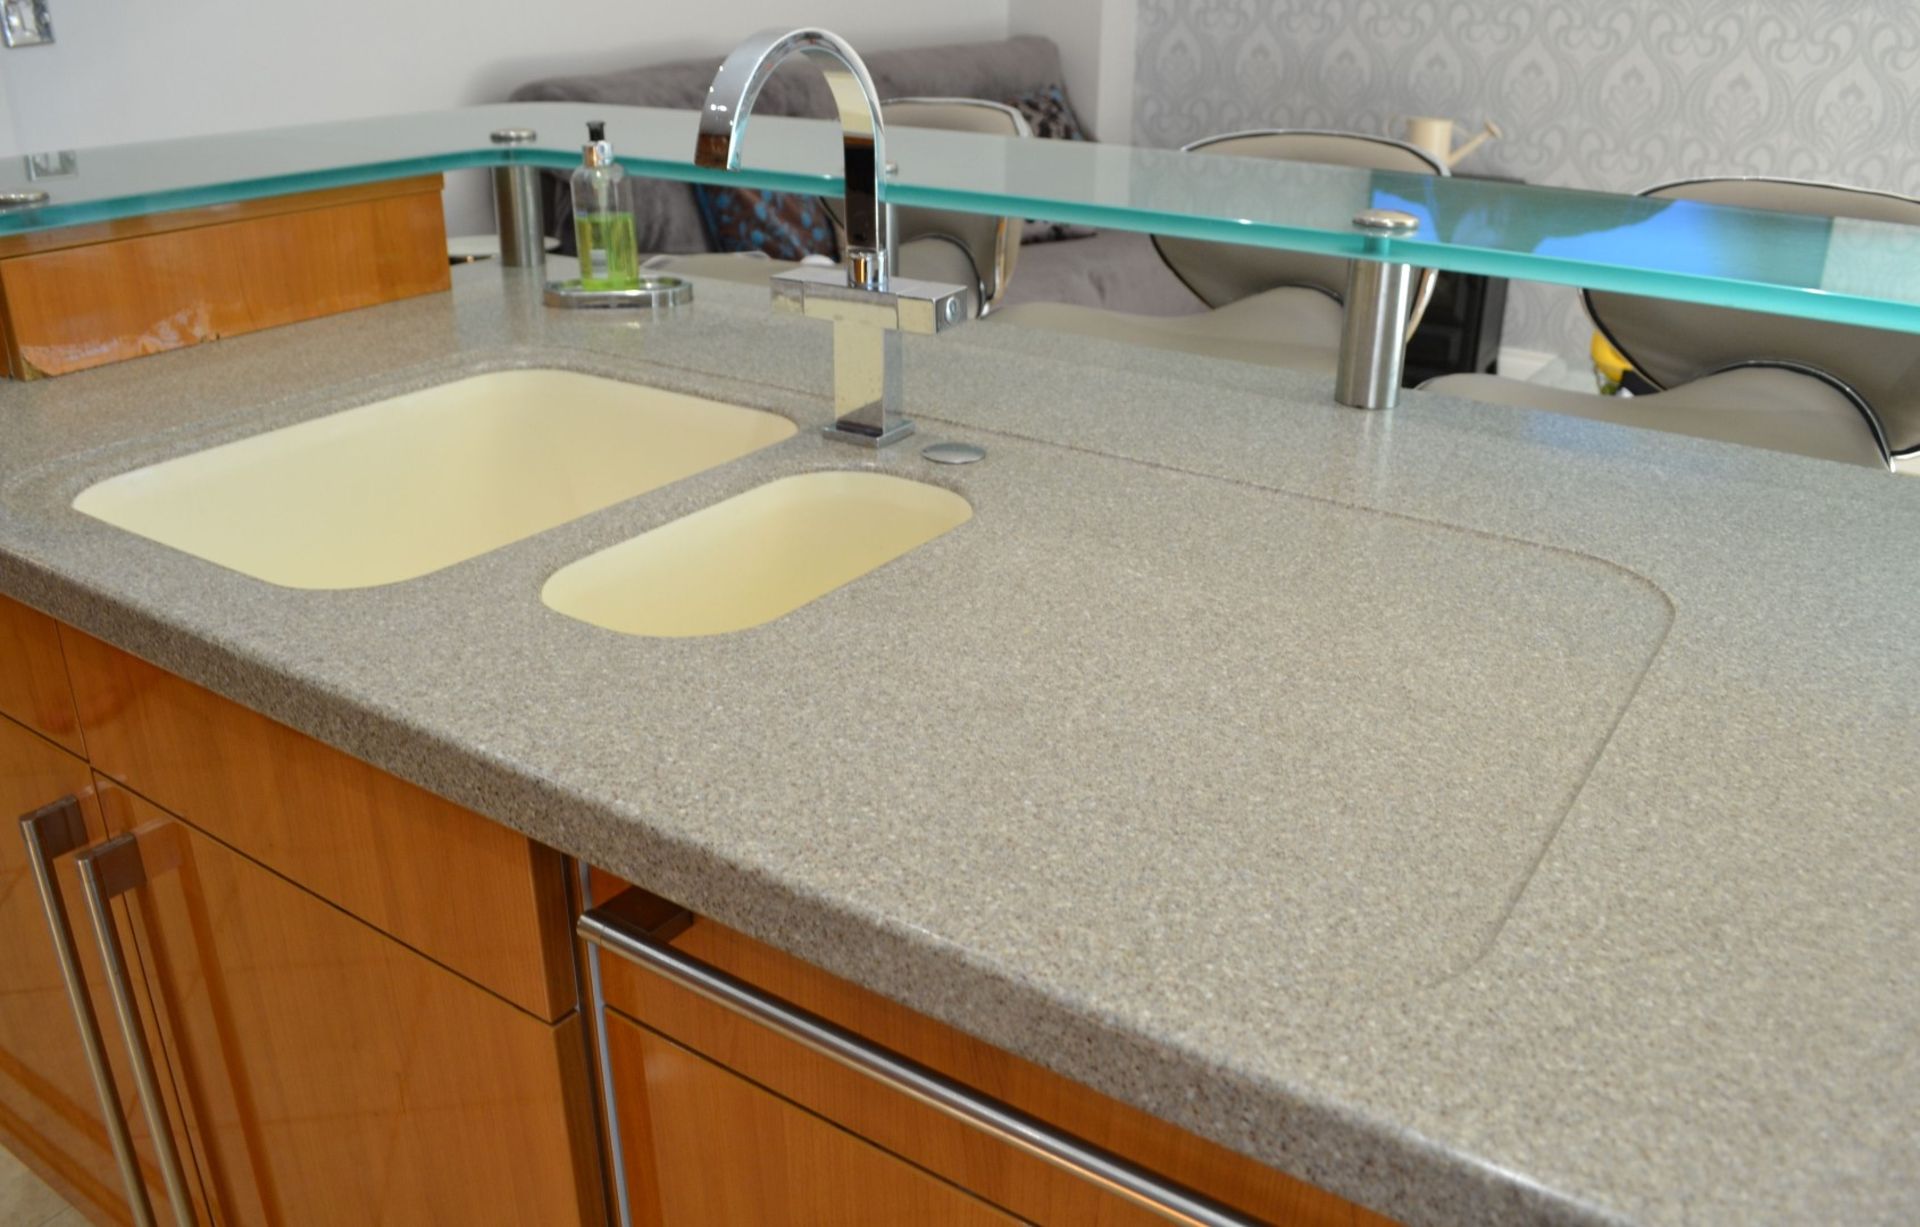 1 x Bespoke Siematic Gloss Fitted Kitchen With Corian Worktops, Frosted Glass Breakfast Bar - NO VAT - Image 32 of 91